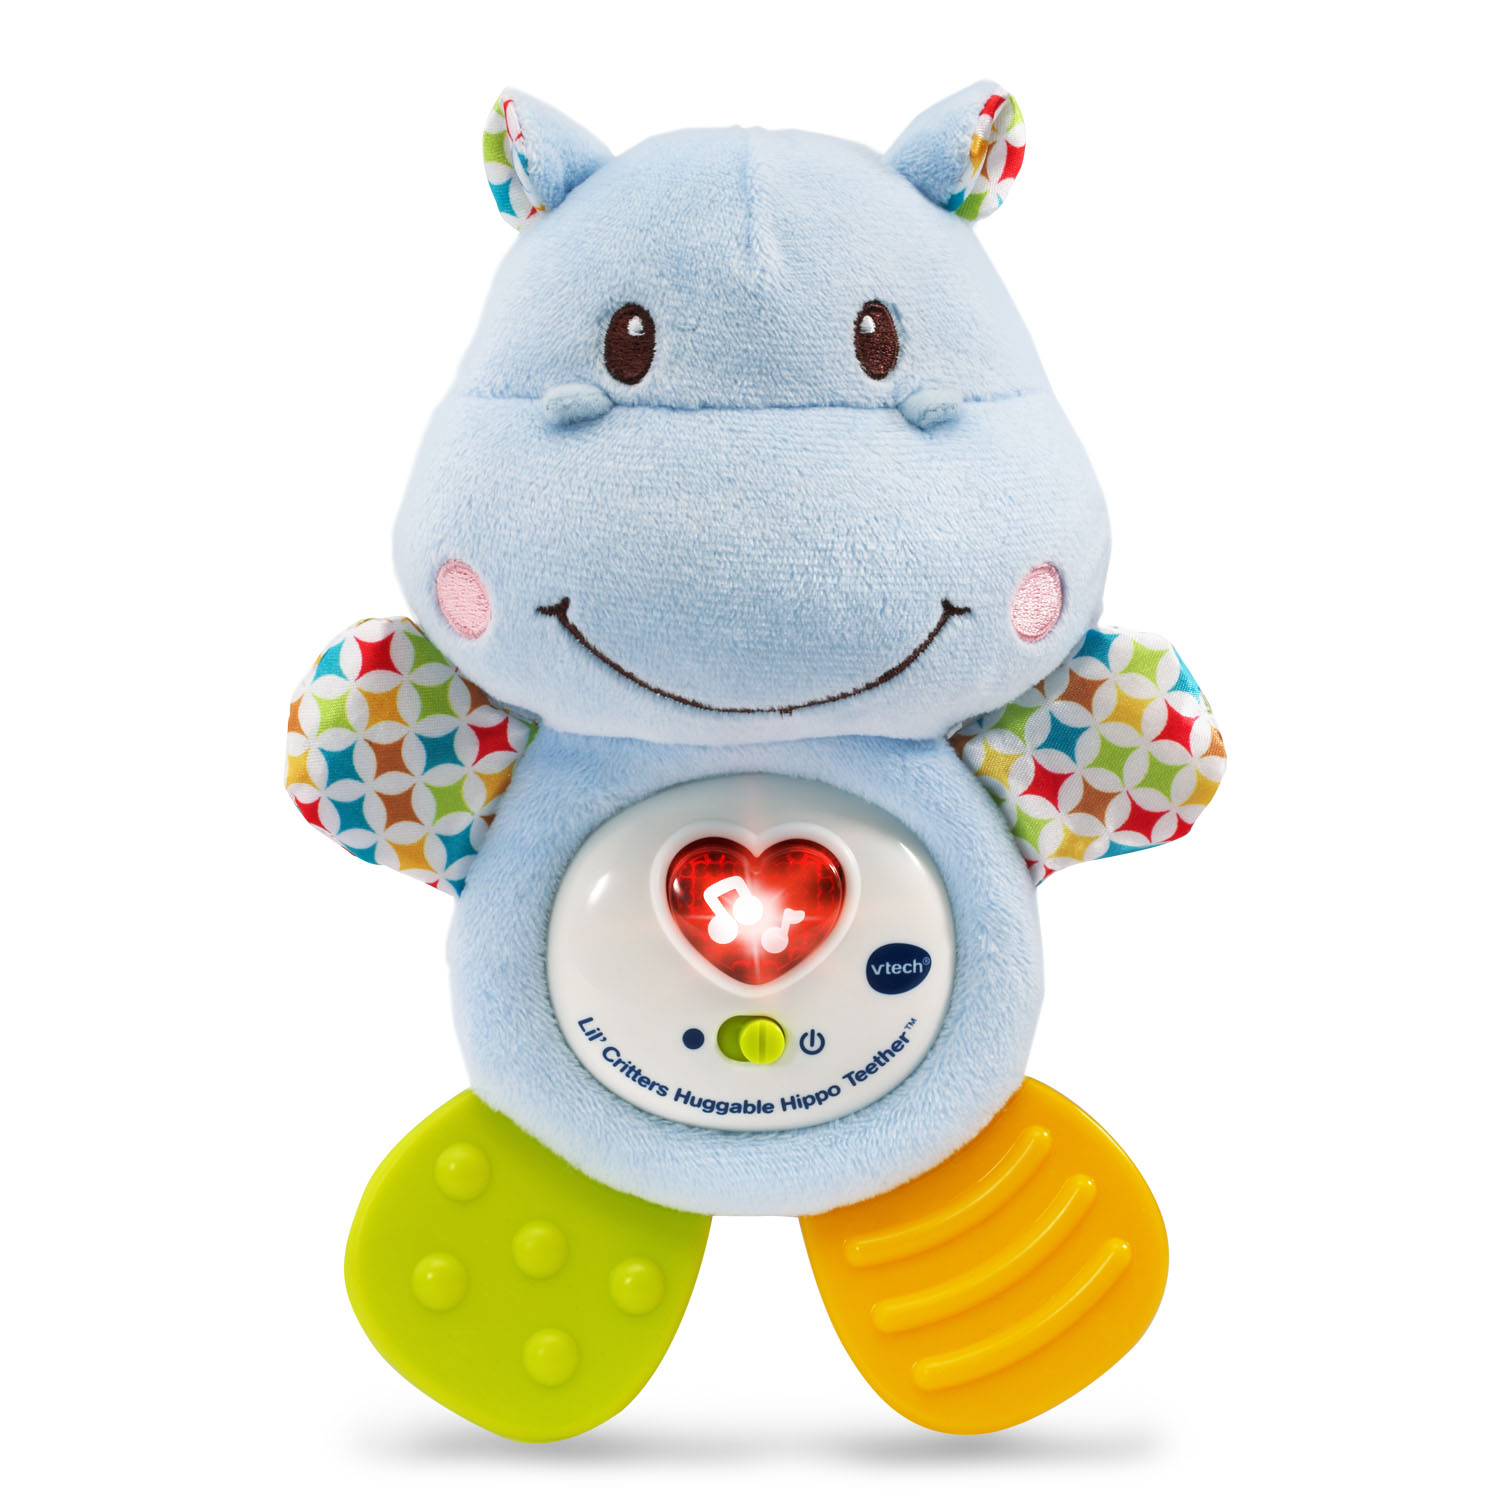 VTech Lil' Critters Huggable Hippo Teether - image 1 of 6